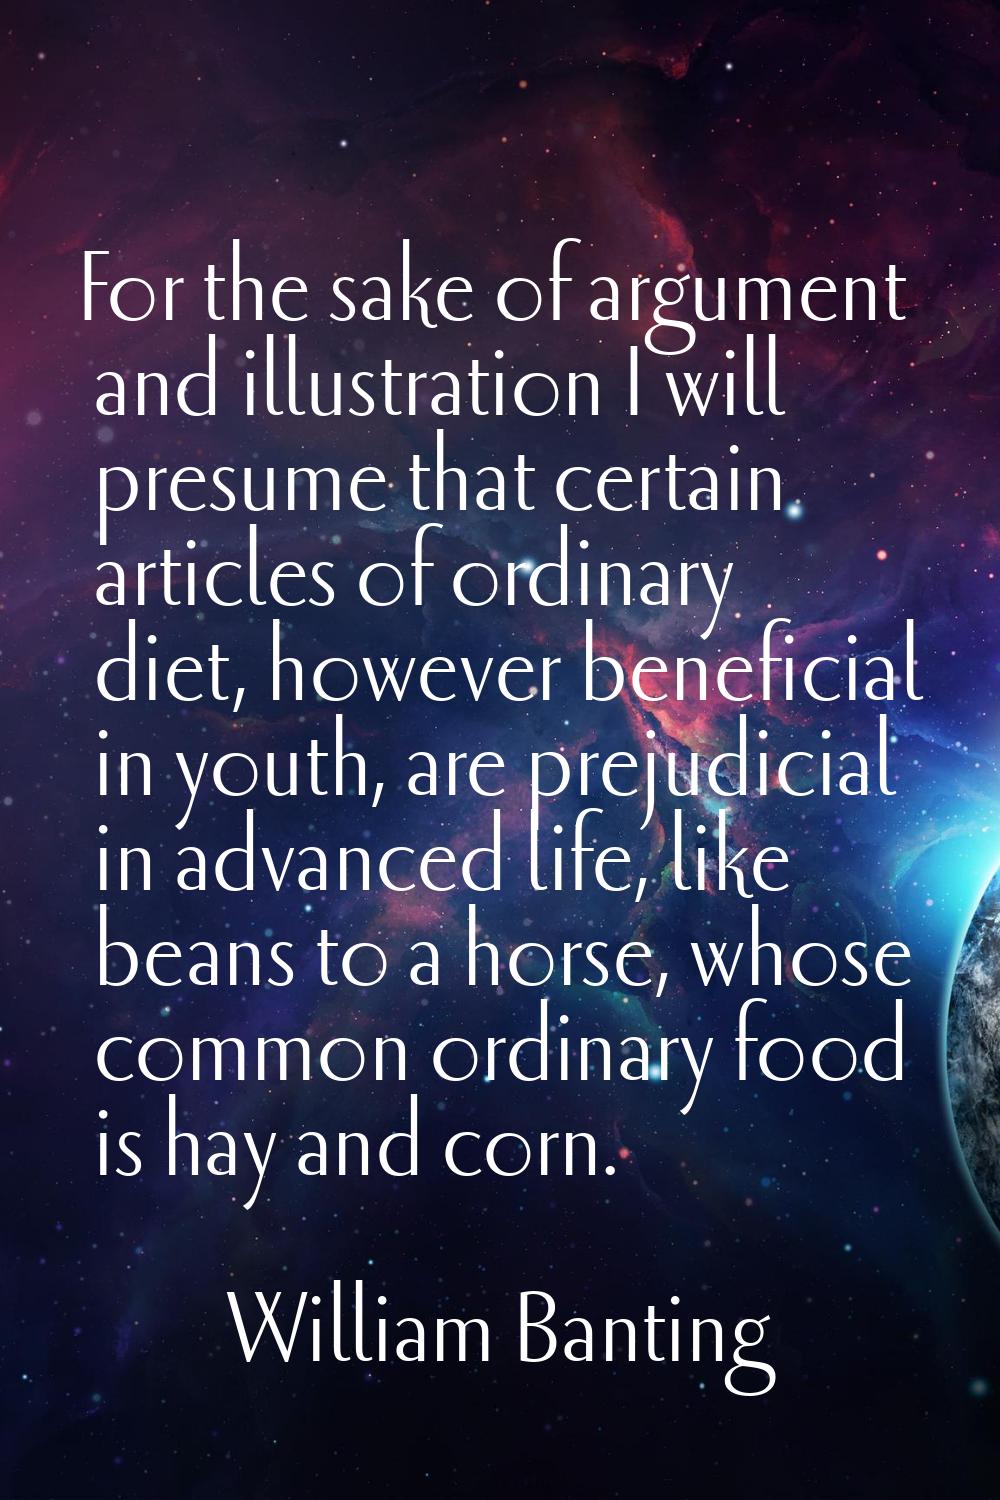 For the sake of argument and illustration I will presume that certain articles of ordinary diet, ho